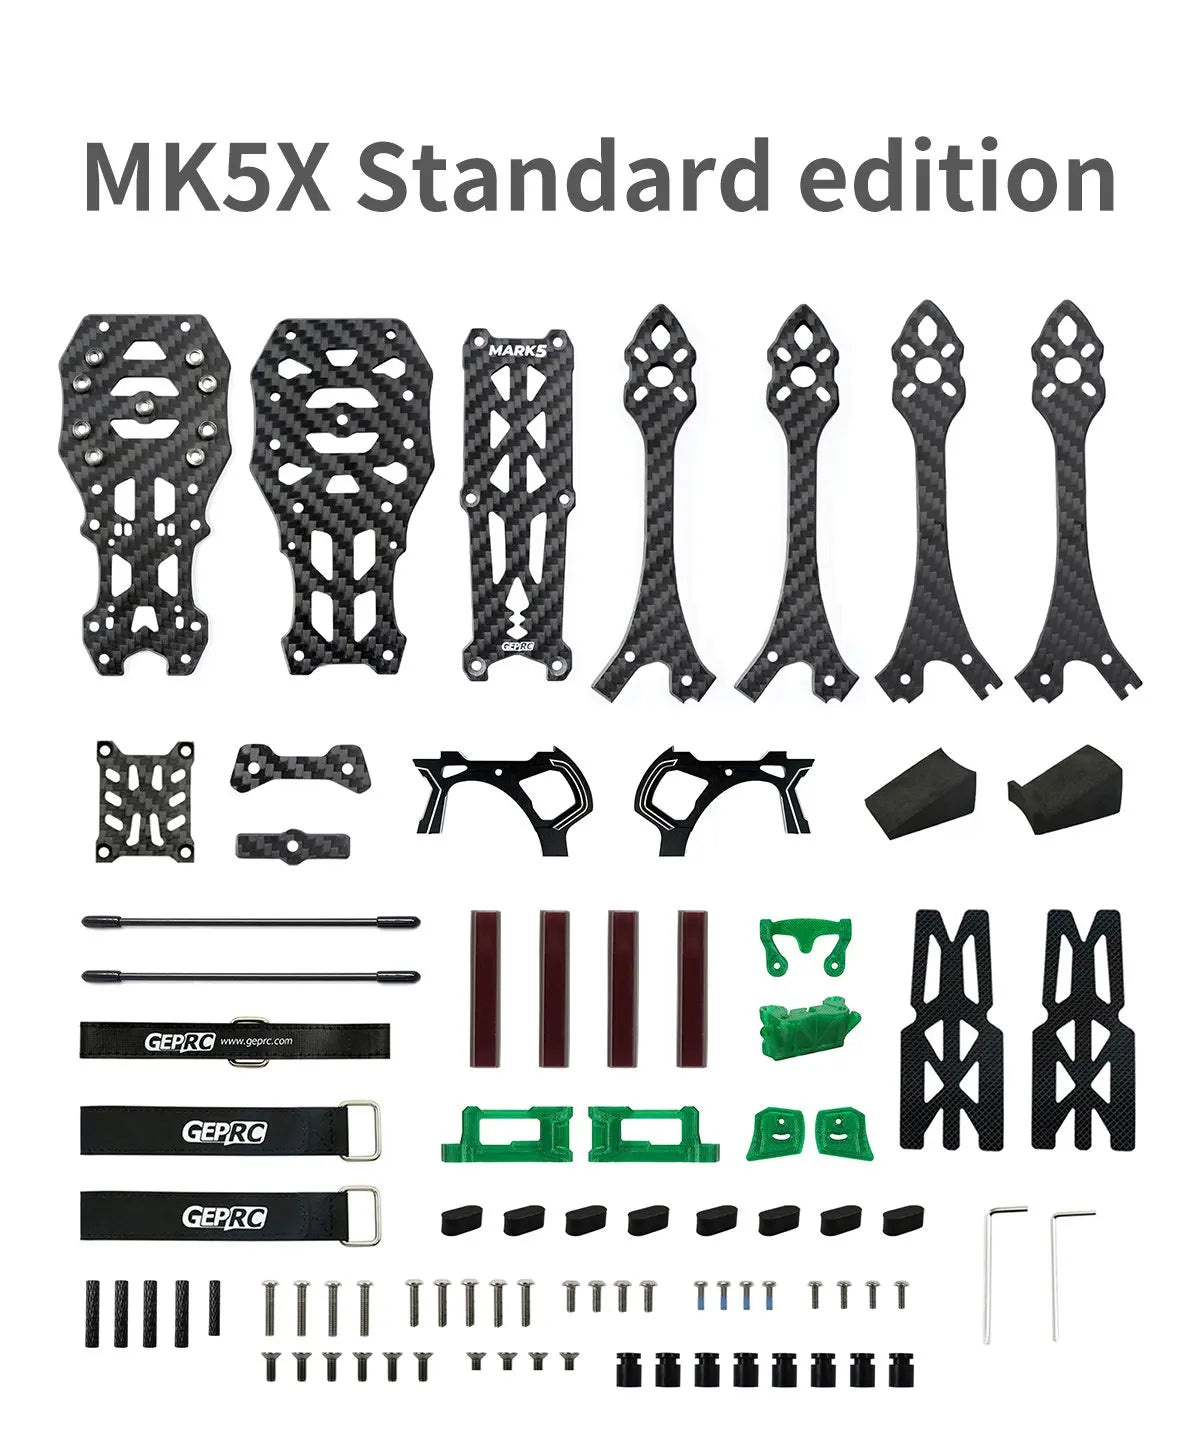 GEP-MK5D O3 MK5X to MK5D Conve DeadCat Frame, FPV Freestyle RC Racing Drone Mark5 - Parts Propeller Access